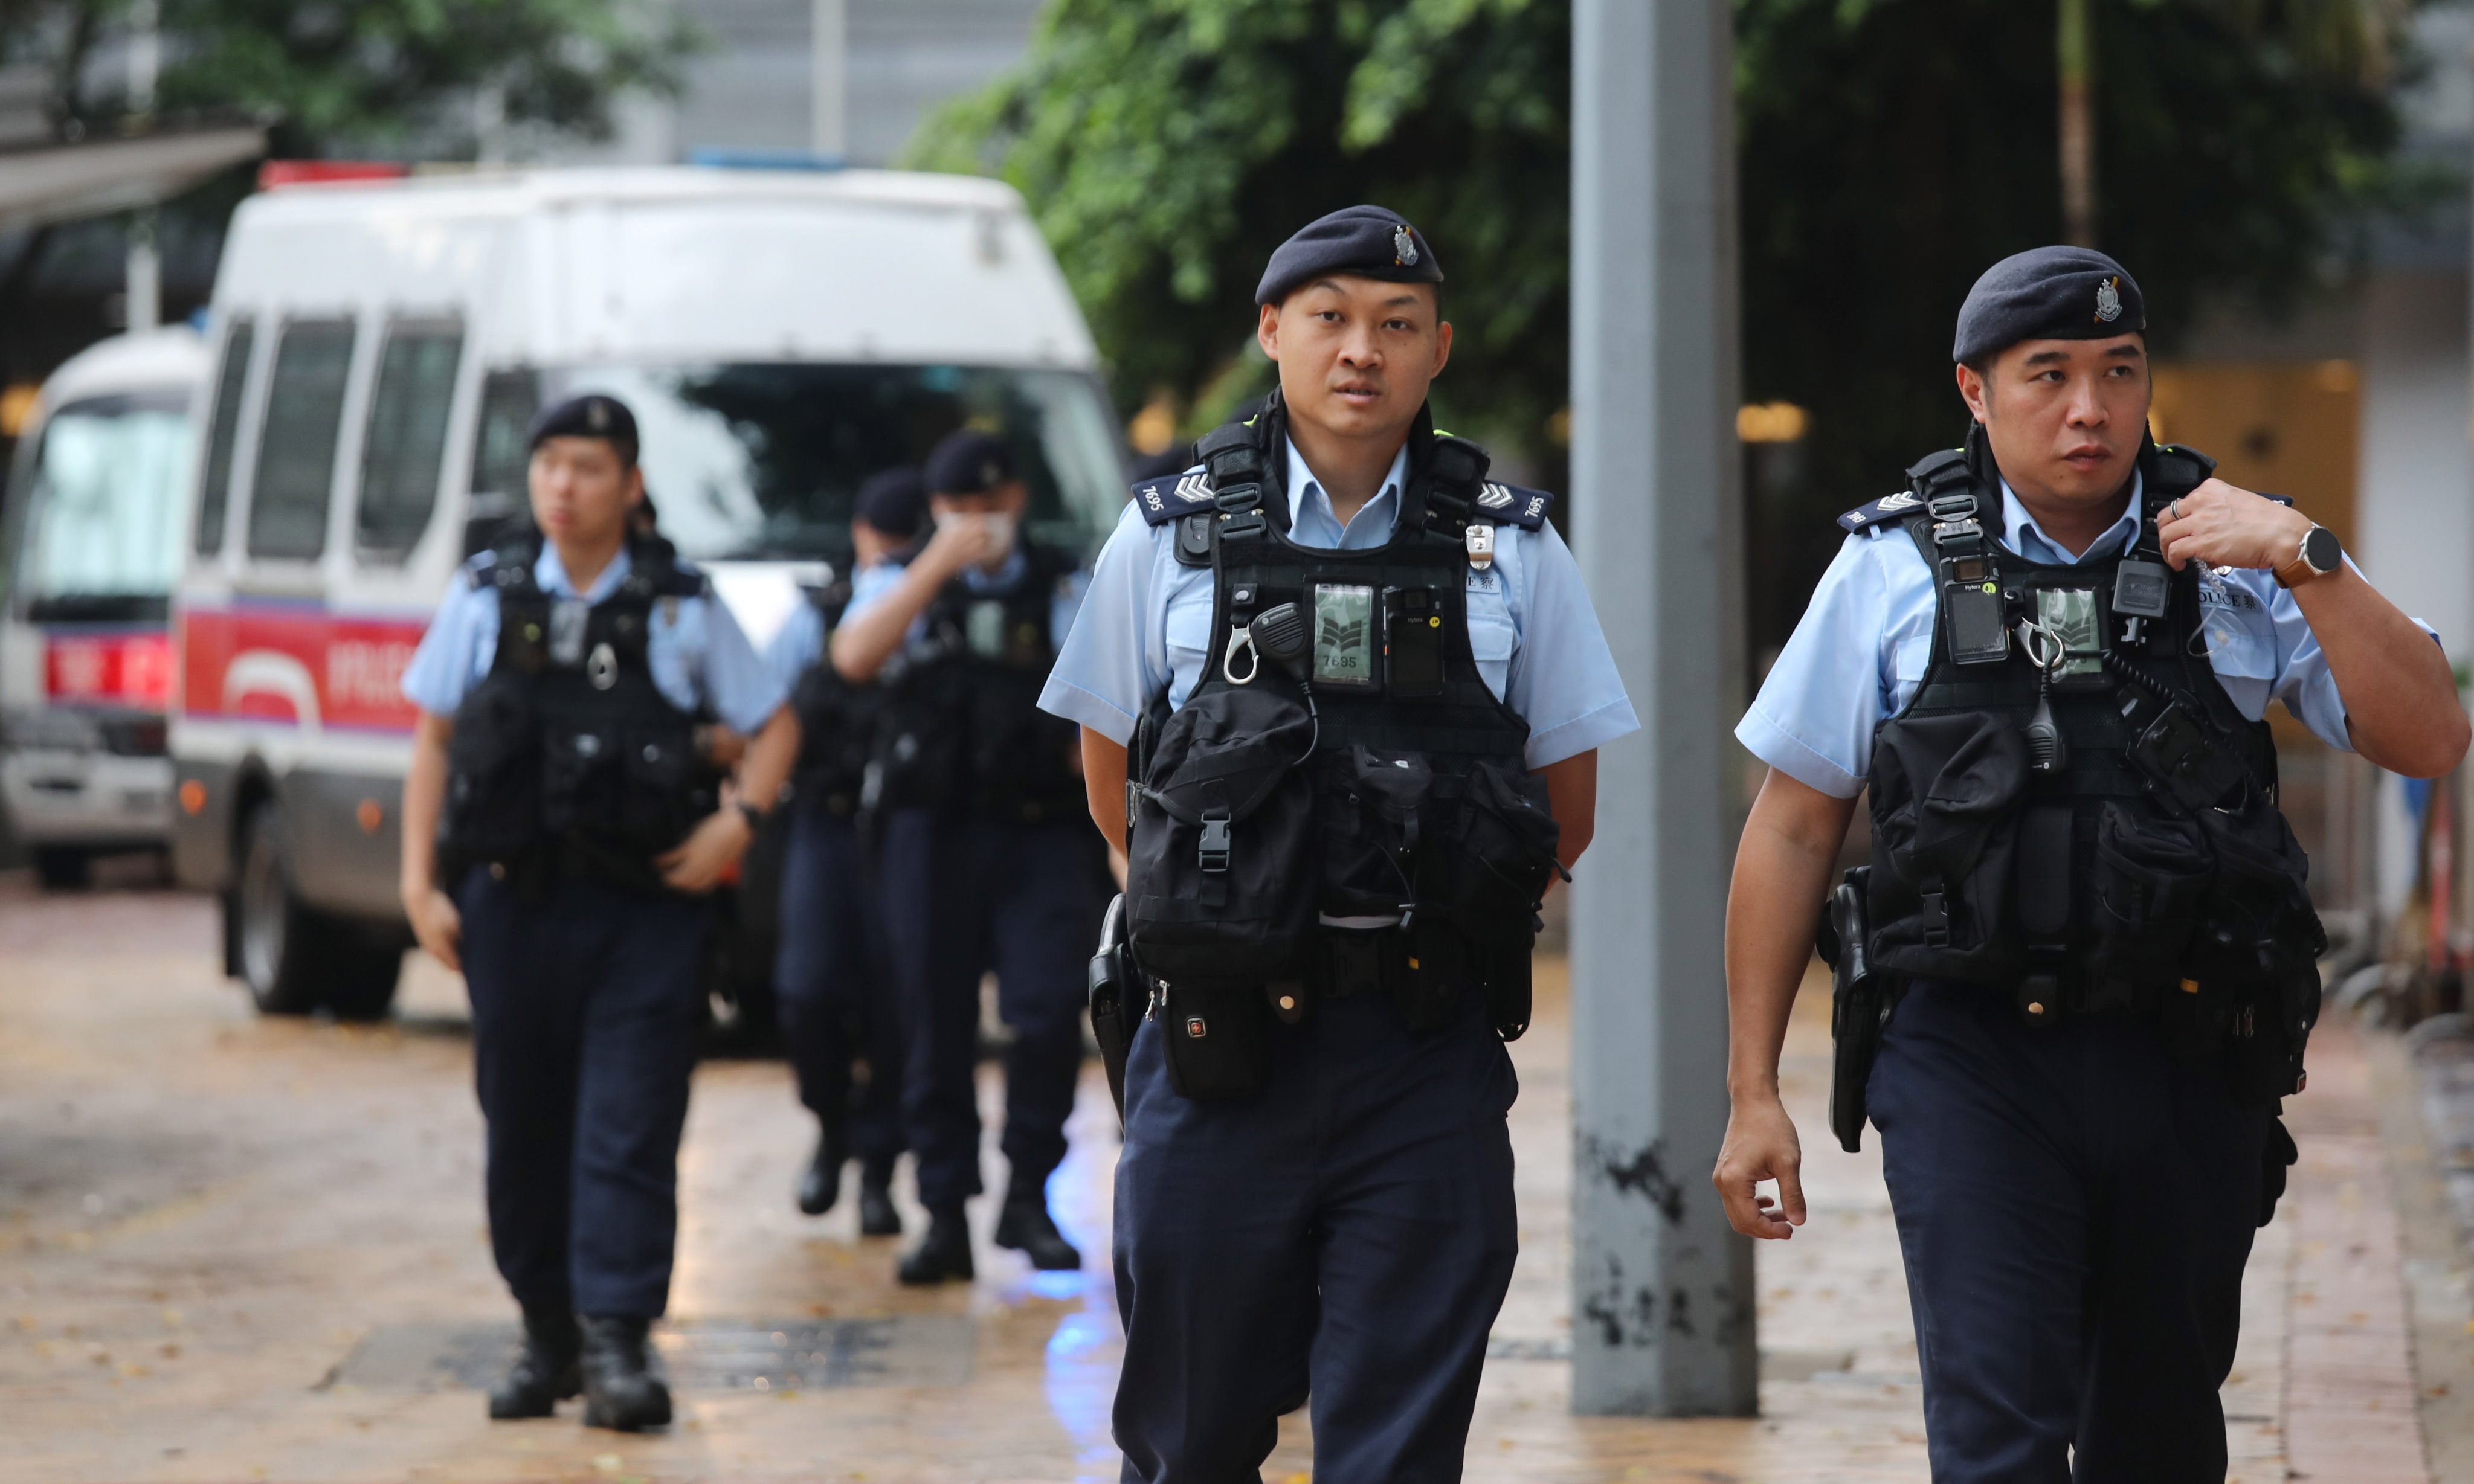 Police officers on patrol near the High Court in Admiralty before the trial session of “Dragon Slaying” team members. Xiaomei Chen